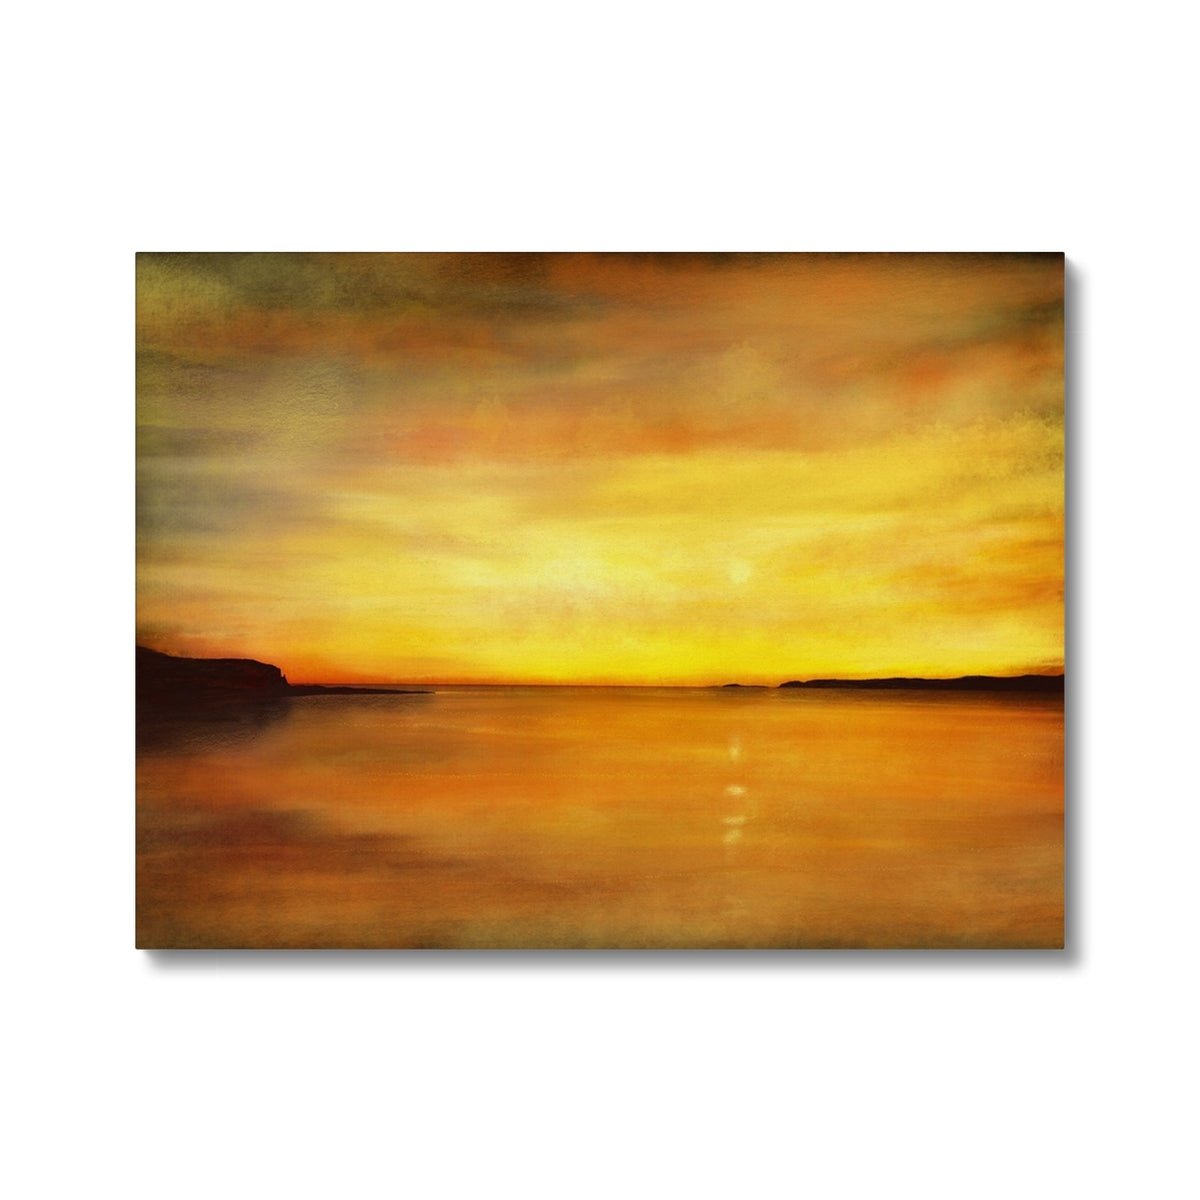 King's Cave Sunset Arran Painting | Canvas From Scotland-Contemporary Stretched Canvas Prints-Arran Art Gallery-24"x18"-Paintings, Prints, Homeware, Art Gifts From Scotland By Scottish Artist Kevin Hunter